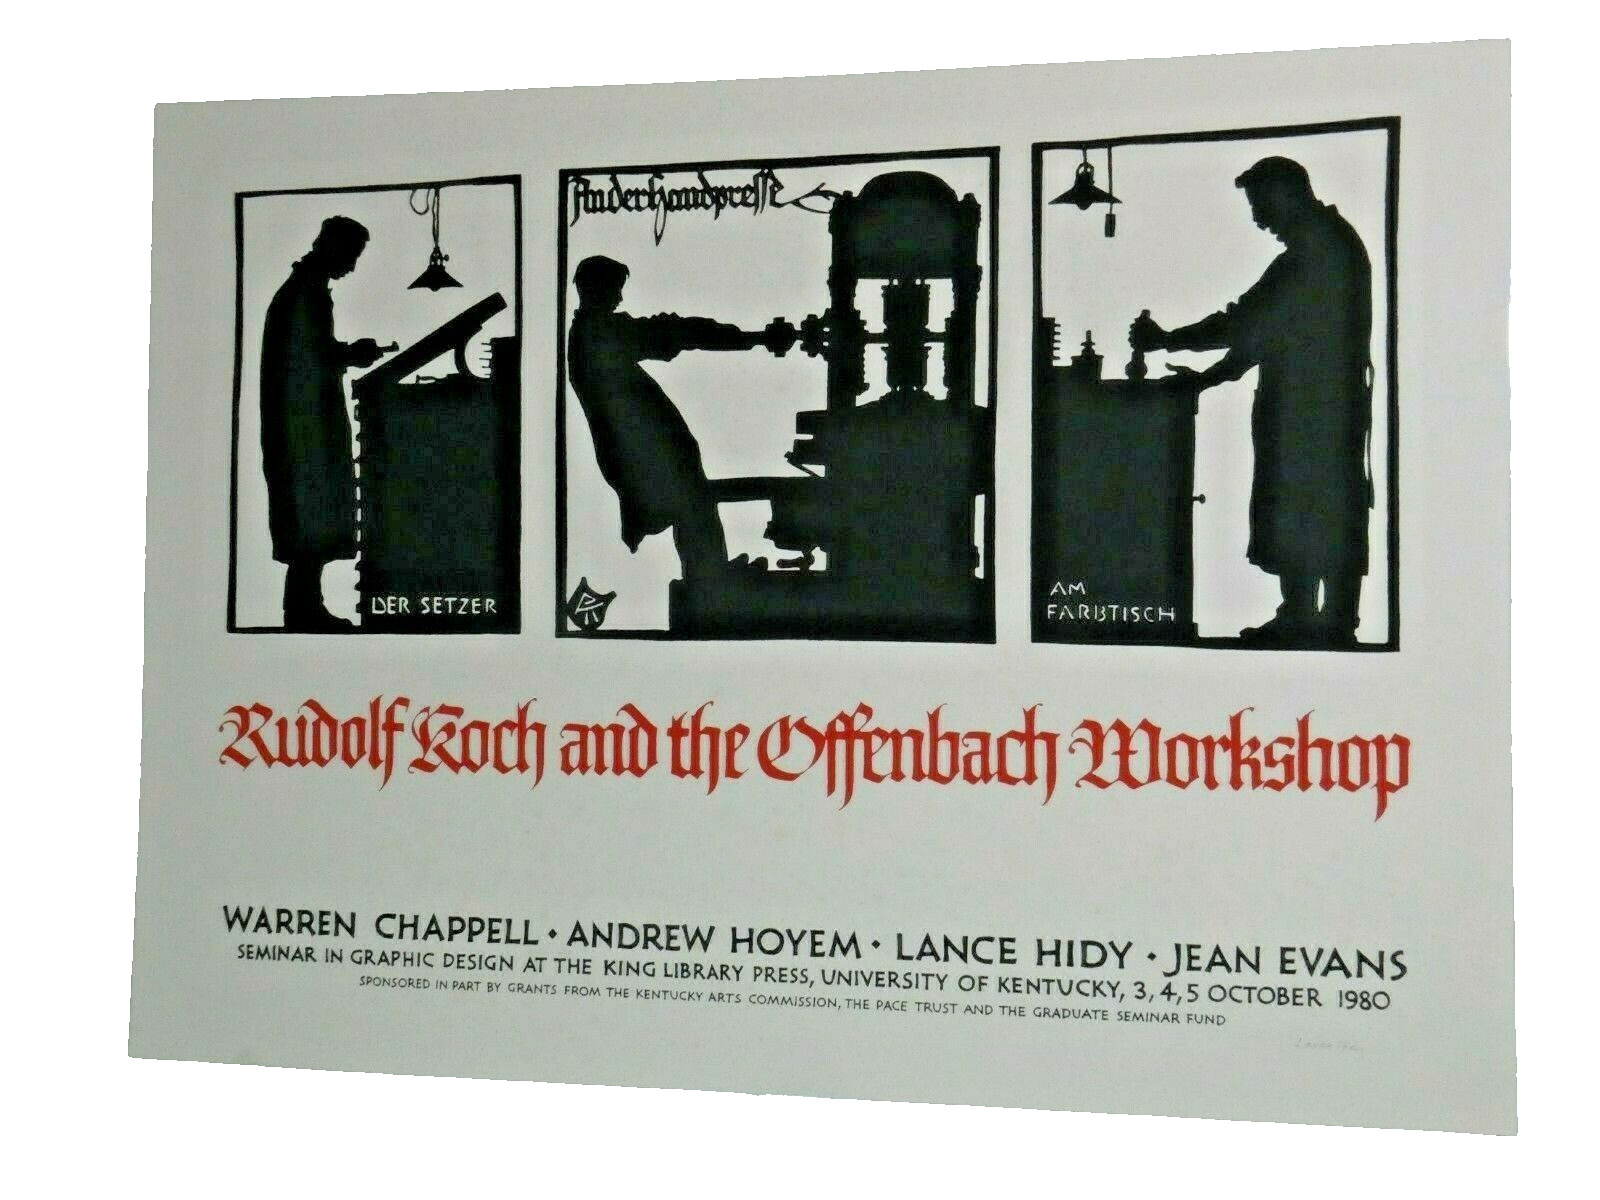 Lance Hidy: Poster for Seminar Rudolf Koch and the Offenbach Workshop, 1980